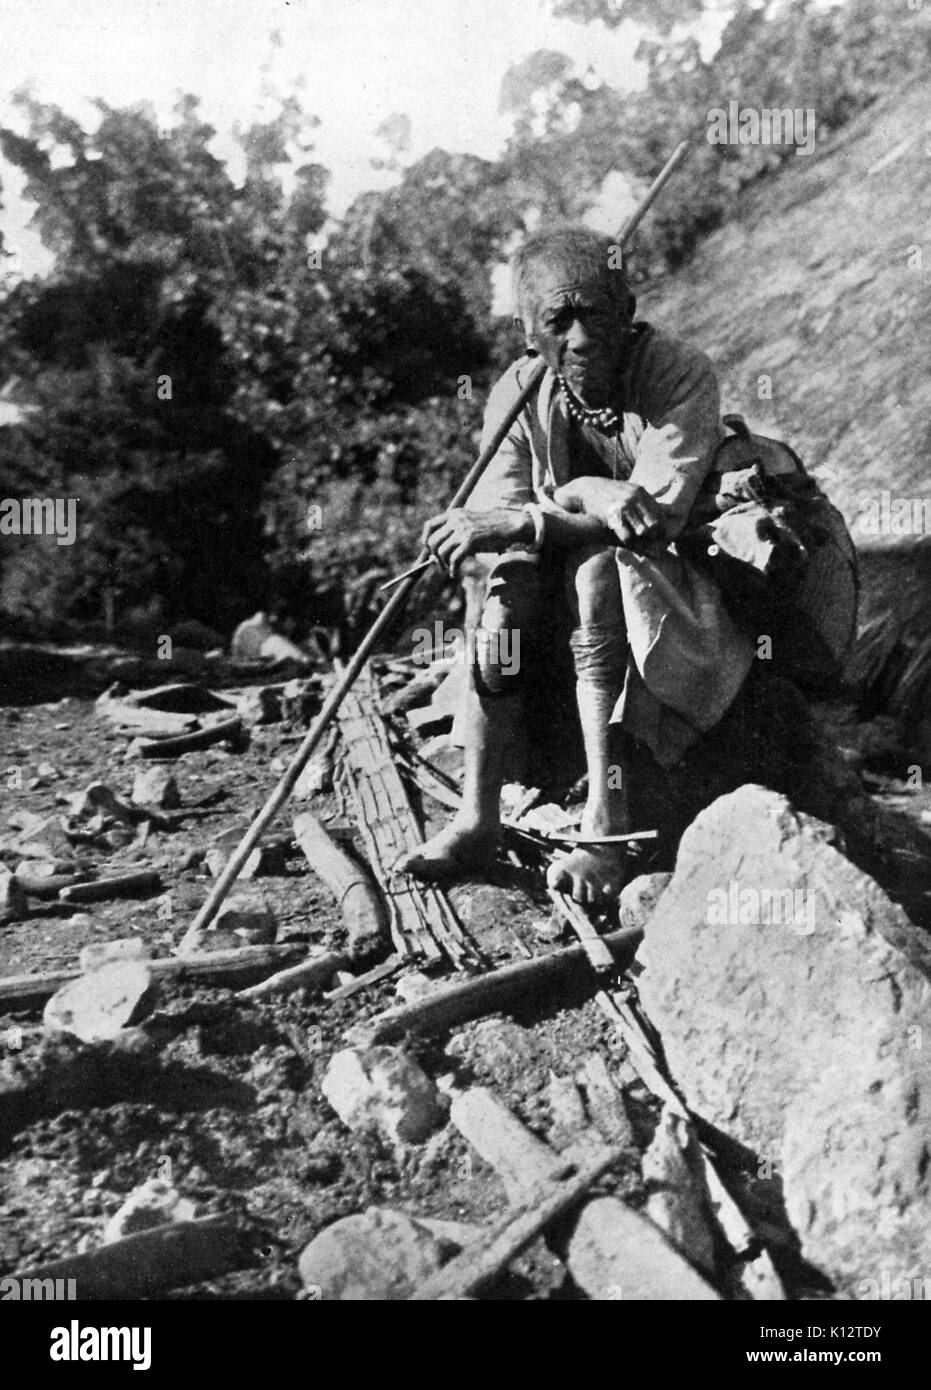 https://c8.alamy.com/comp/K12TDY/guangto-bachelor-sitting-on-a-rock-and-holding-a-wooden-pole-1922-K12TDY.jpg